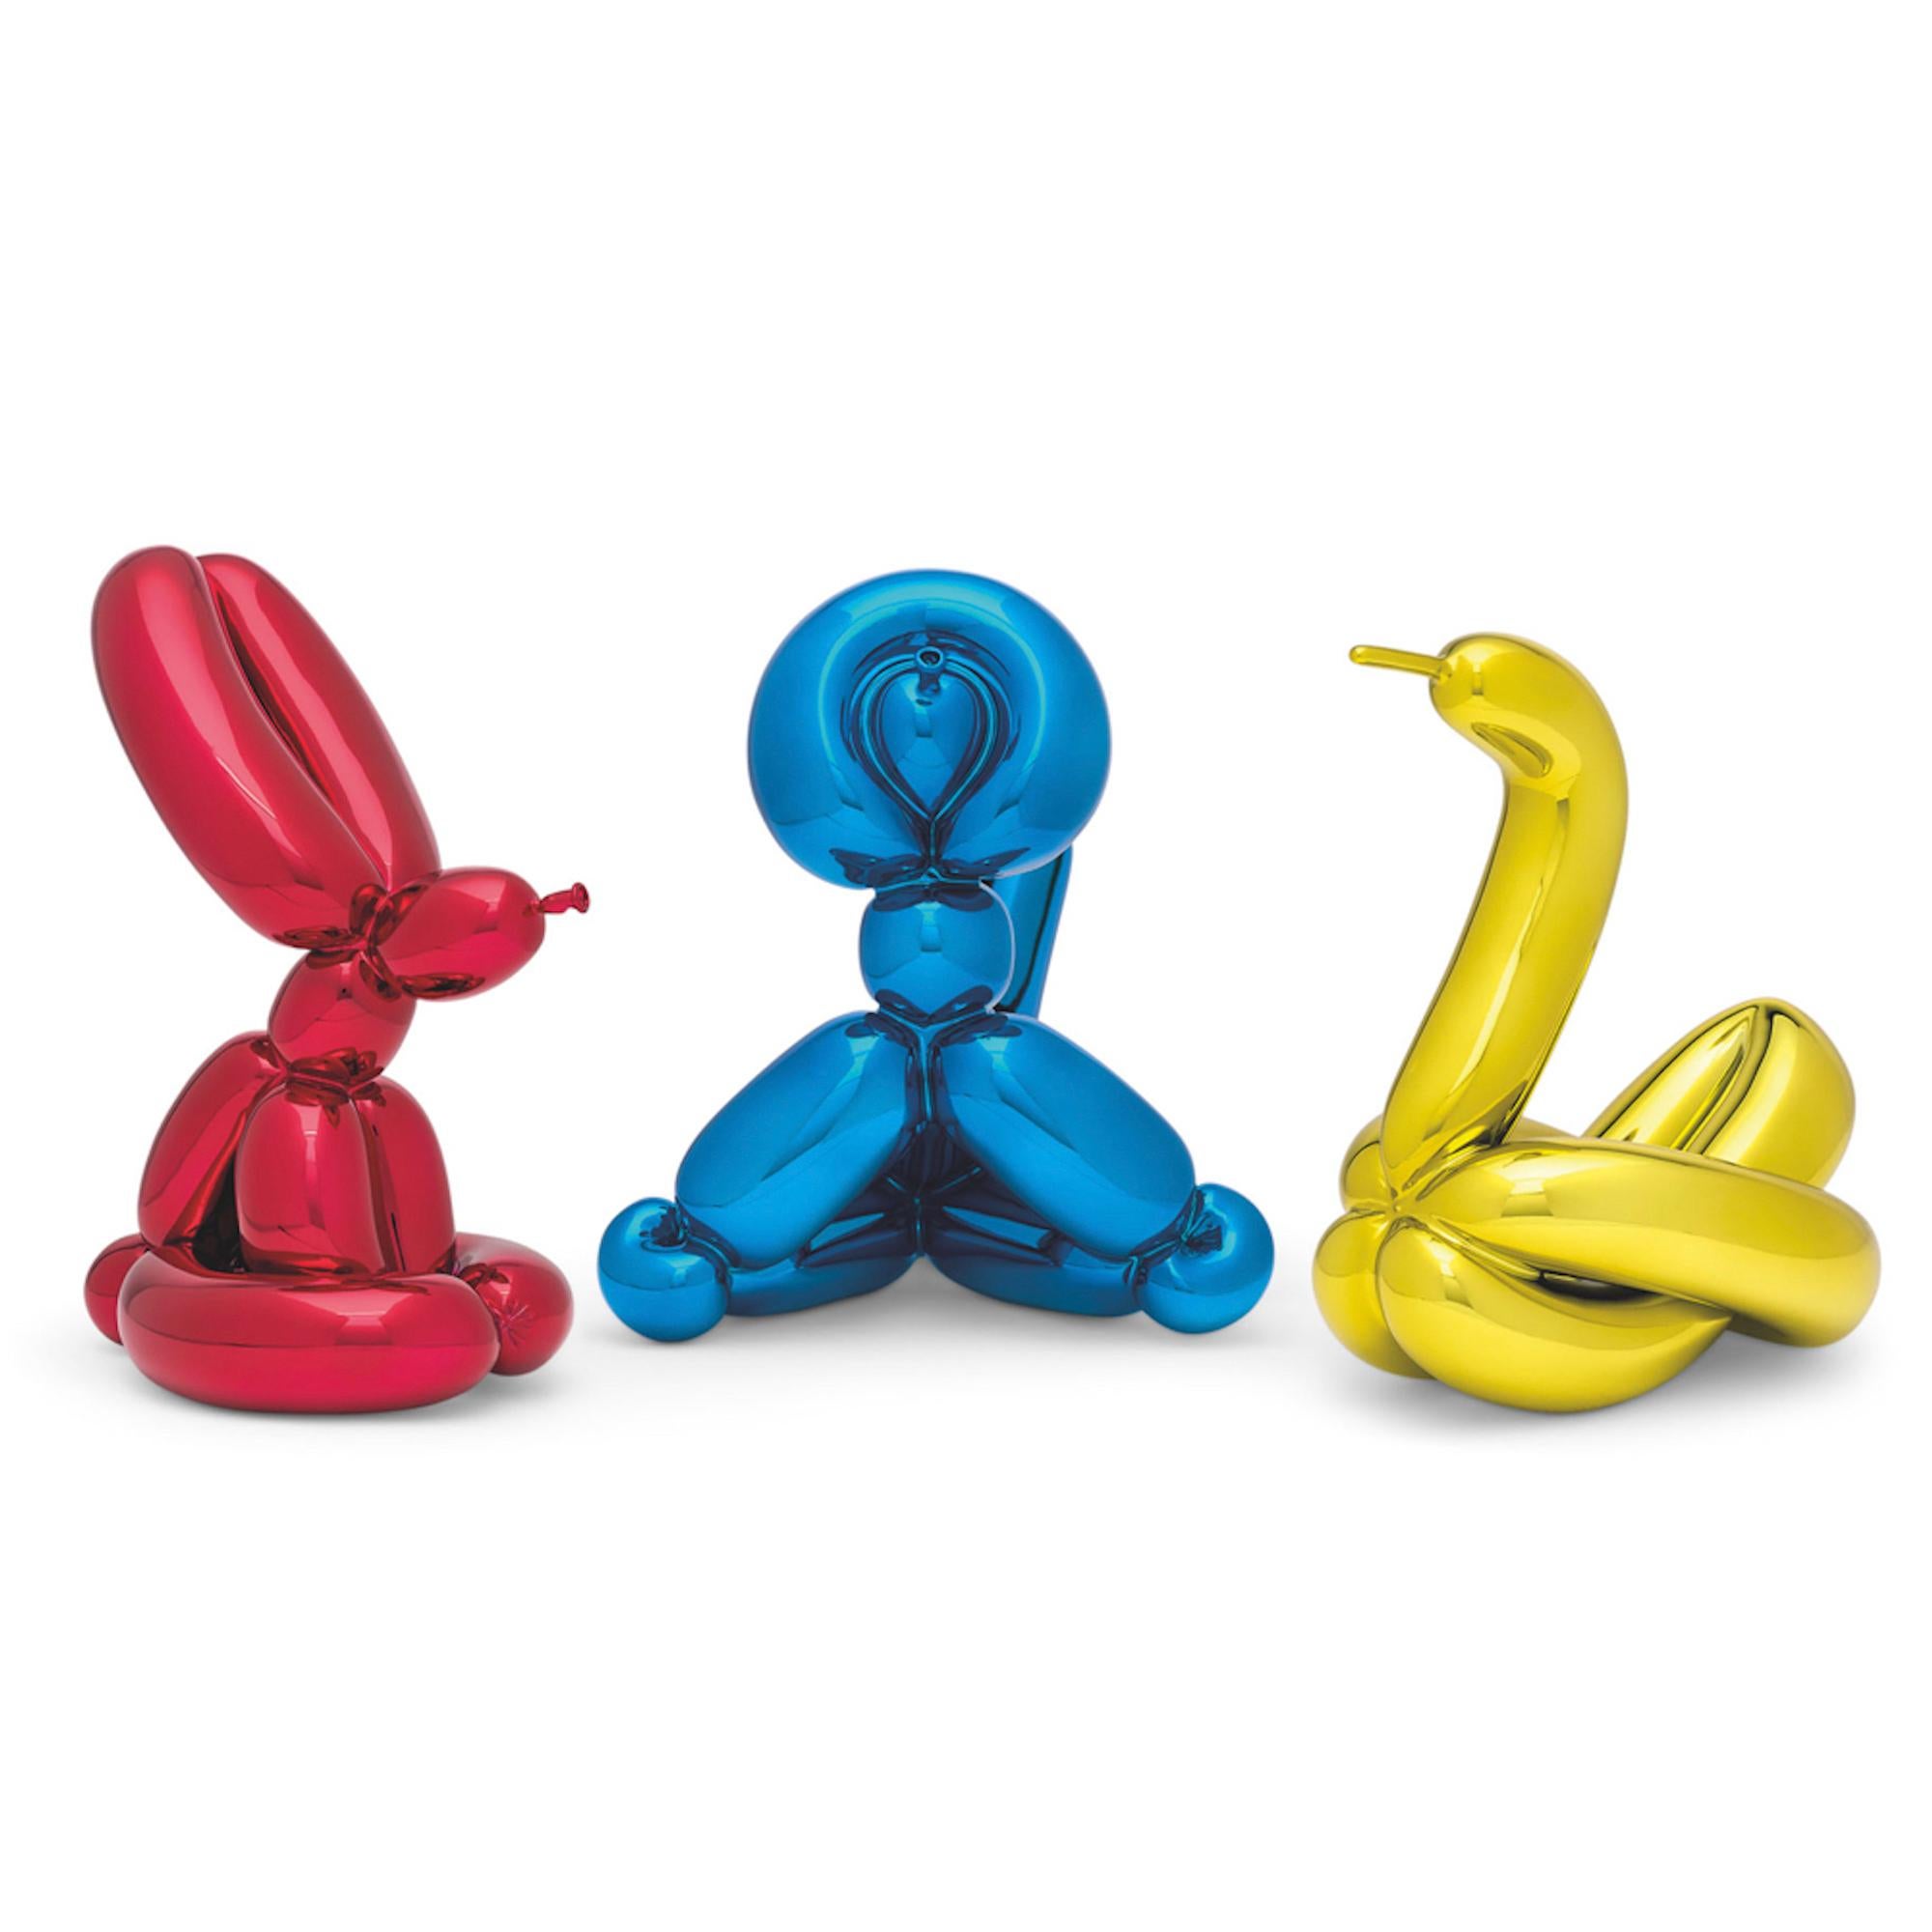 JEFF KOONS (1955-Present)

Yellow Swan, Blue Monkey and Red Rabbit stamped with the signature Jeff Koons, title, date '17 from the edition of 999. Porcelain with high-gloss glazing, in 3 parts.

Balloon Rabbit: 9½ by 7 by 8 in. 
Balloon Monkey: 10